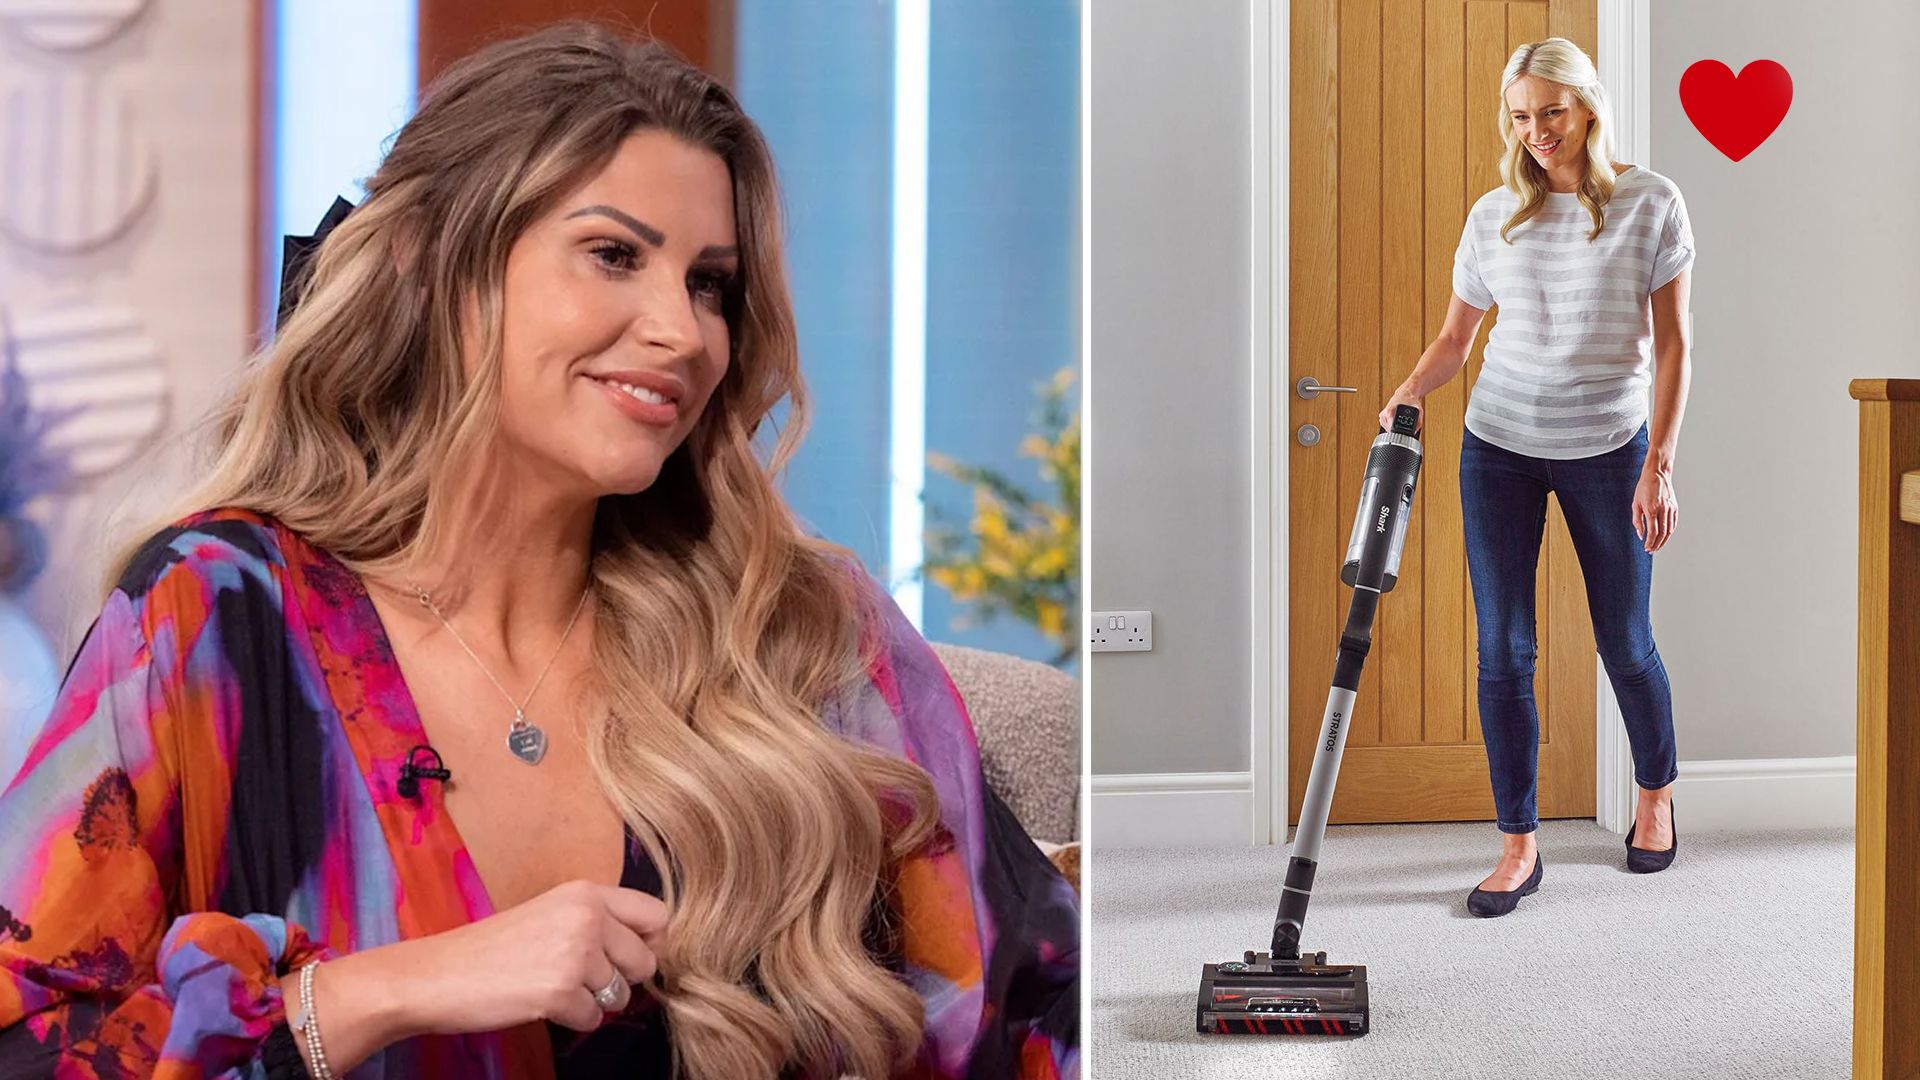 Shark have slashed the price of Mrs Hinch’s trusted vacuum by £200 - hurry